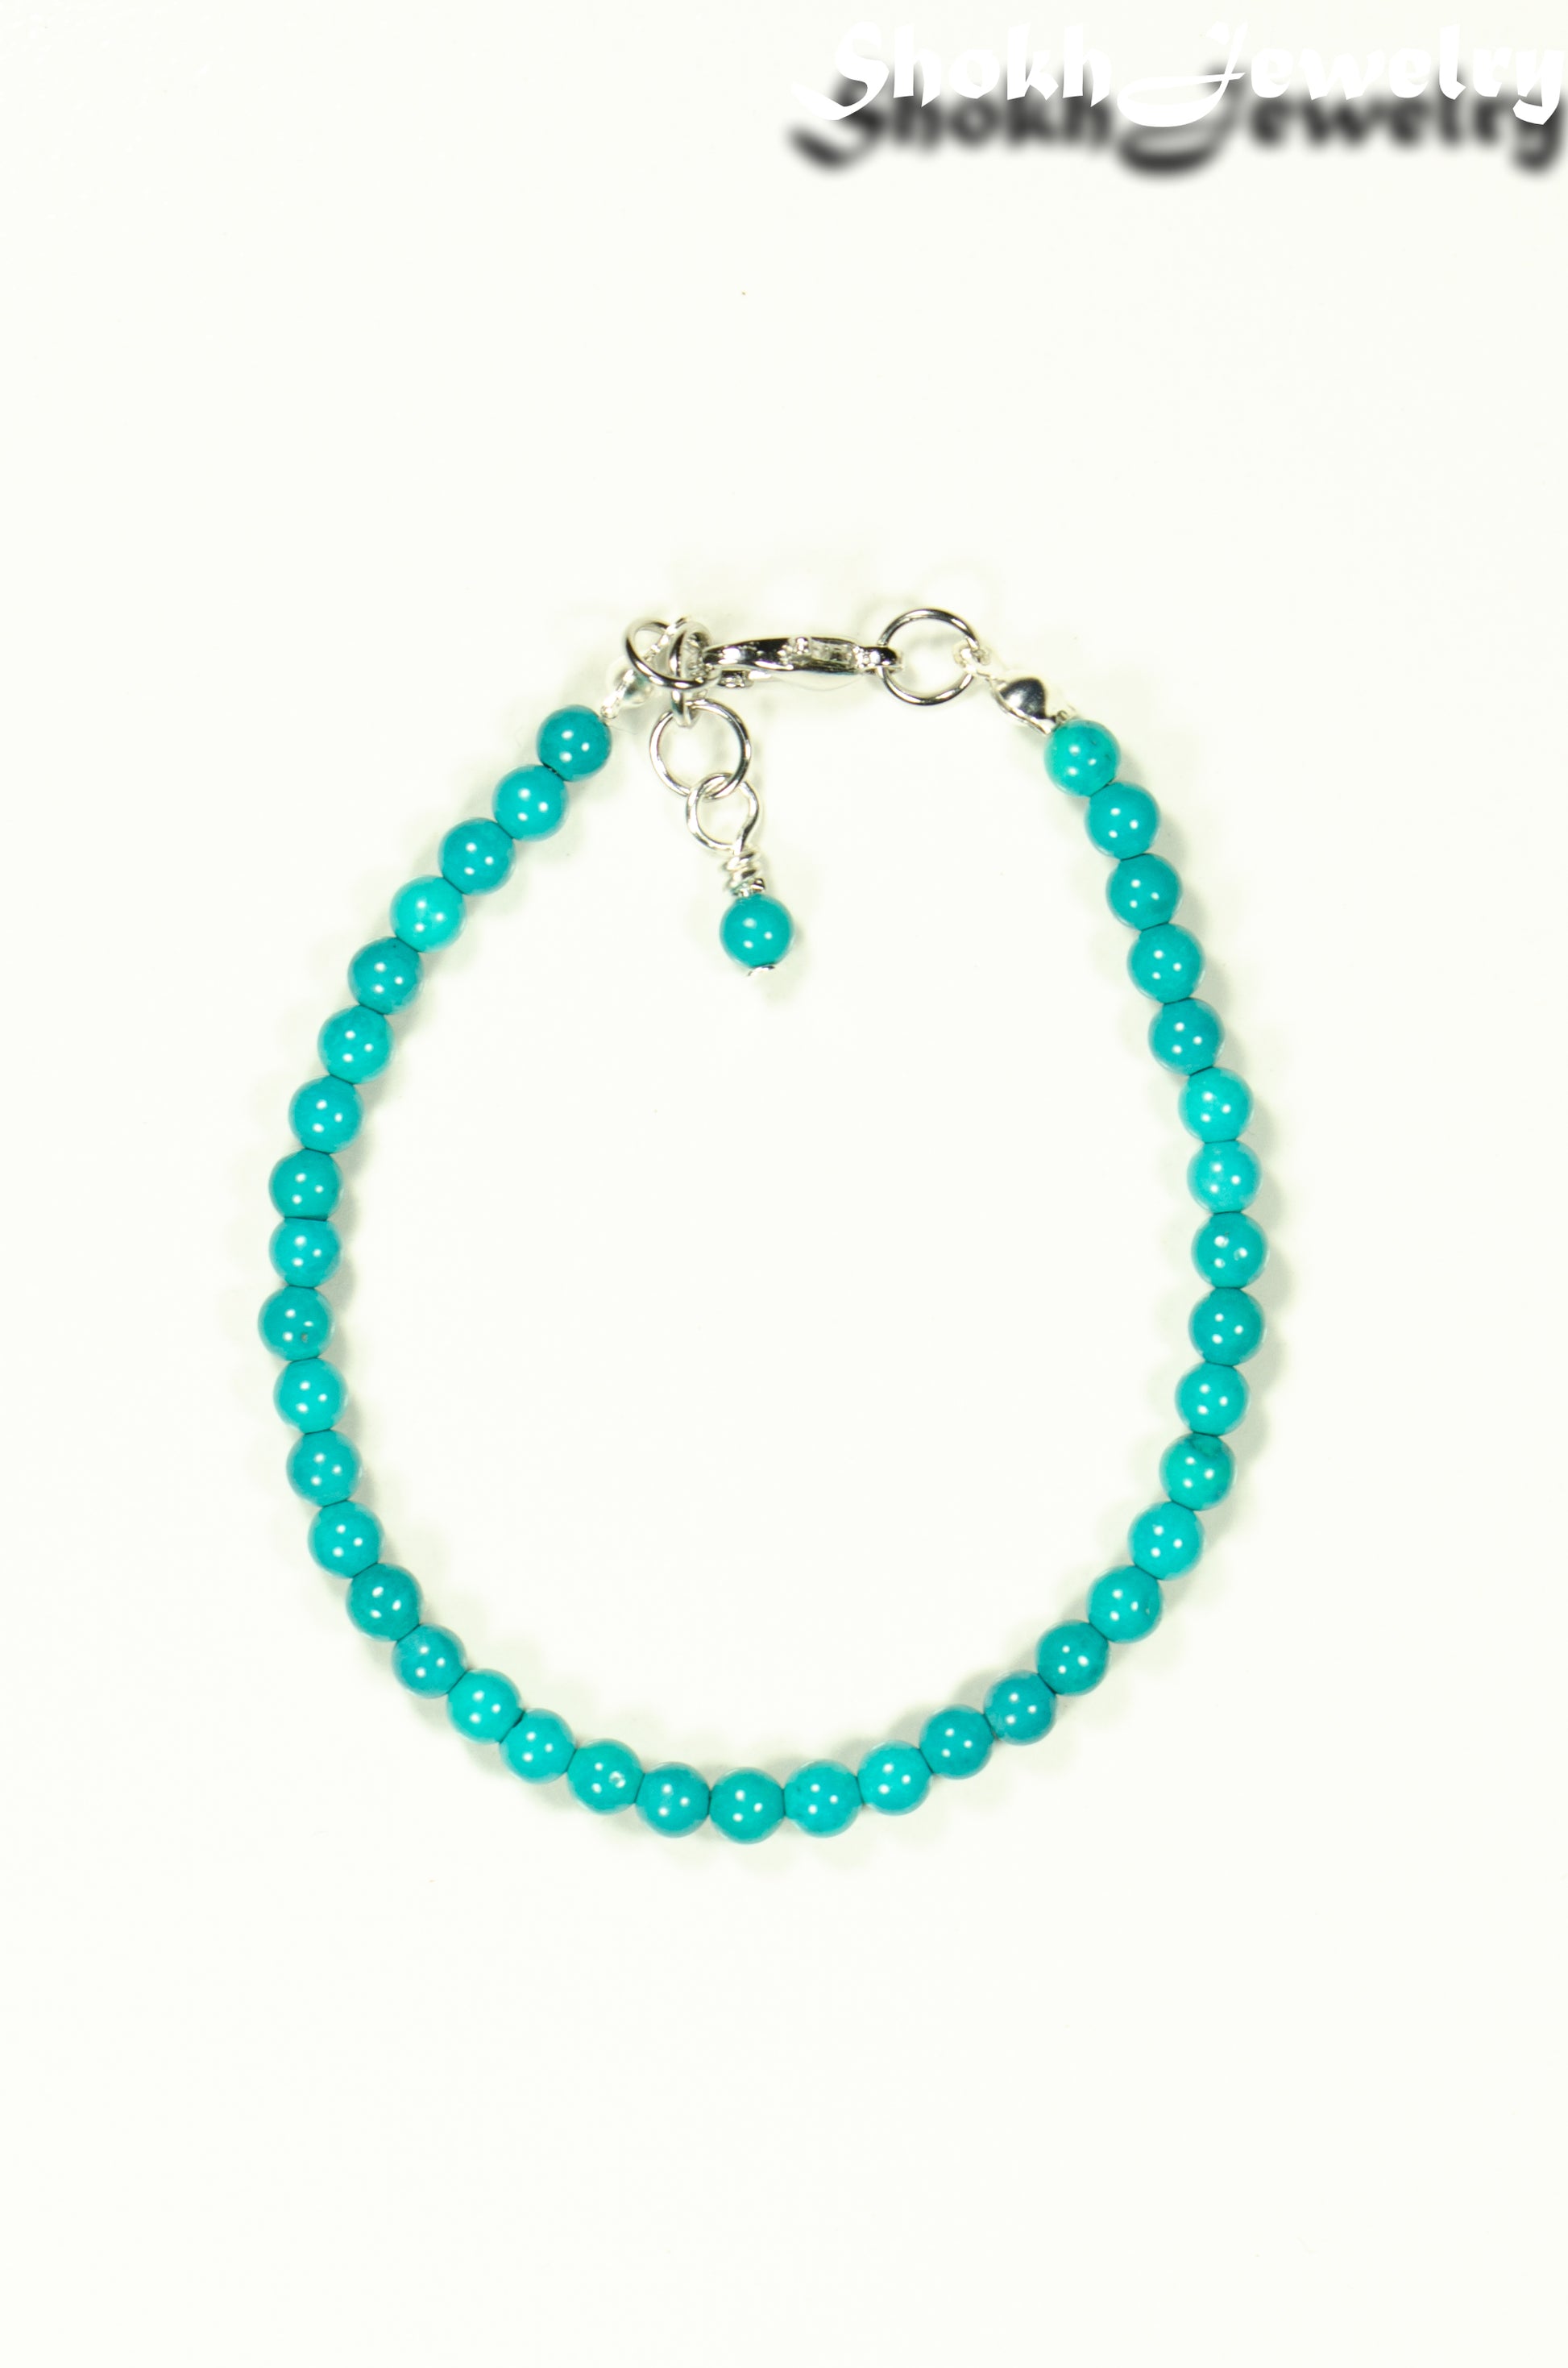 Top view of 4mm Turquoise Stone Bracelet with Clasp.